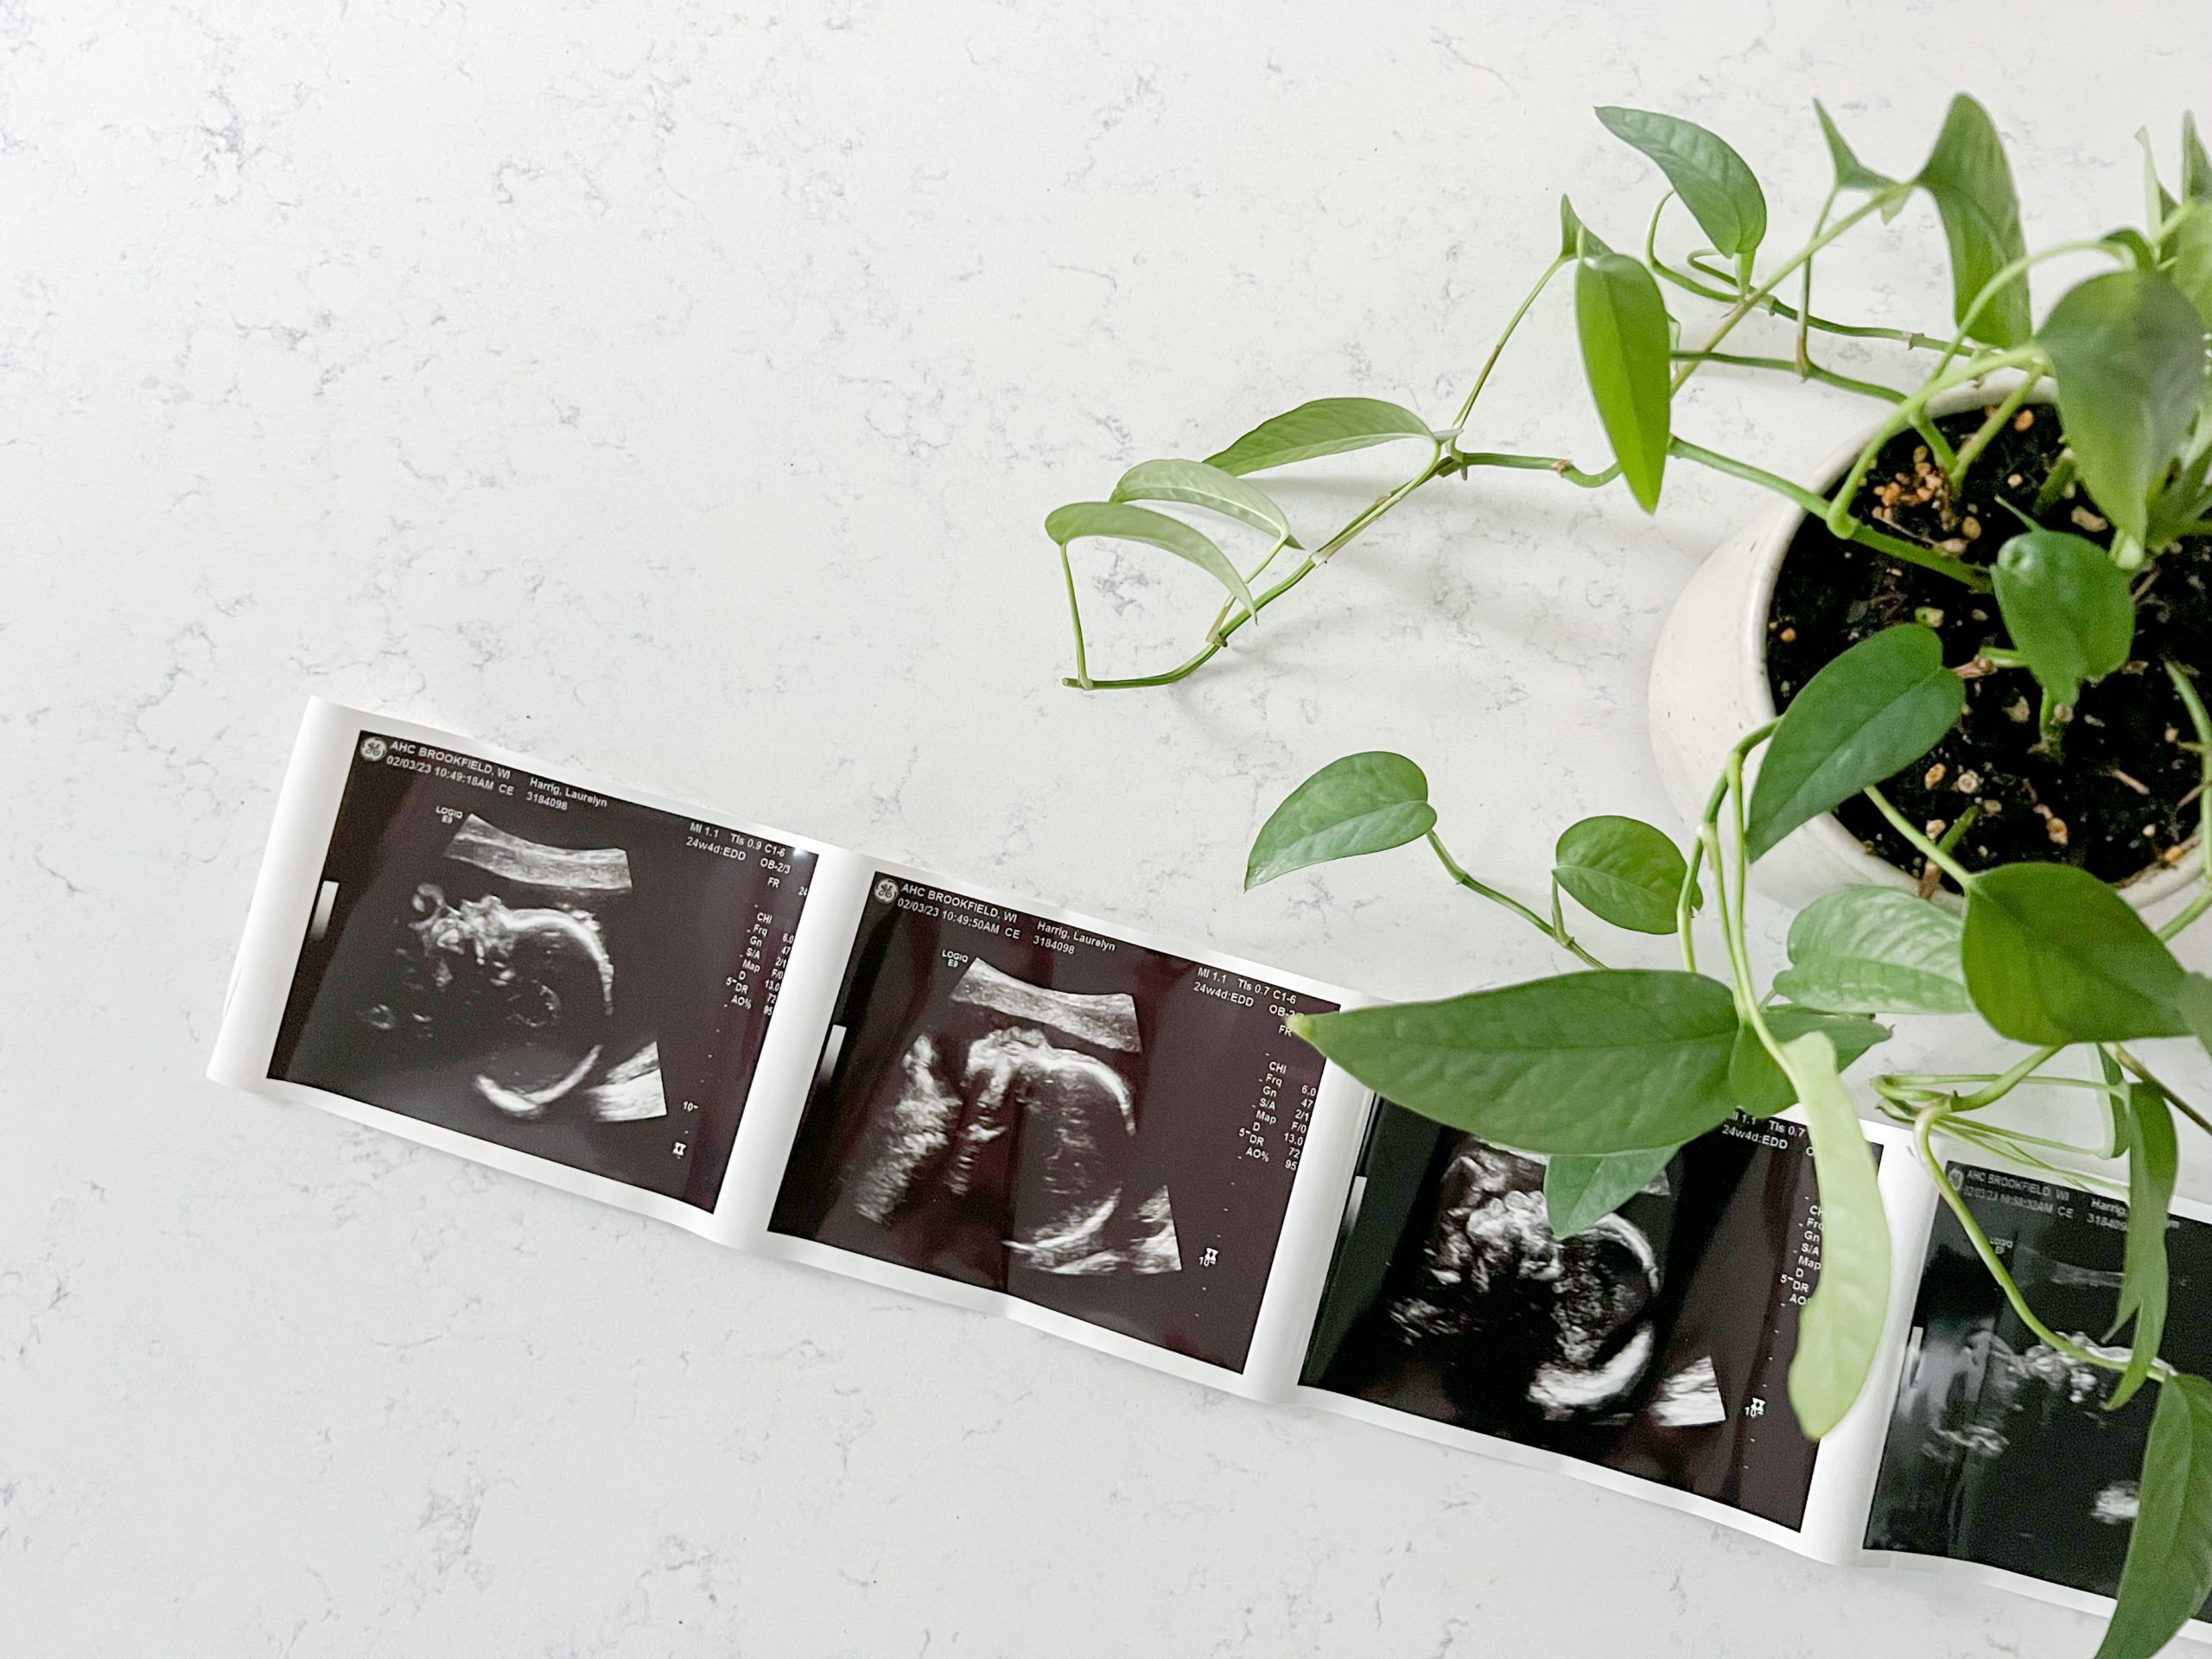 ultrasound sonogram image to announce pregnancy for woman business owner, a brand photographer